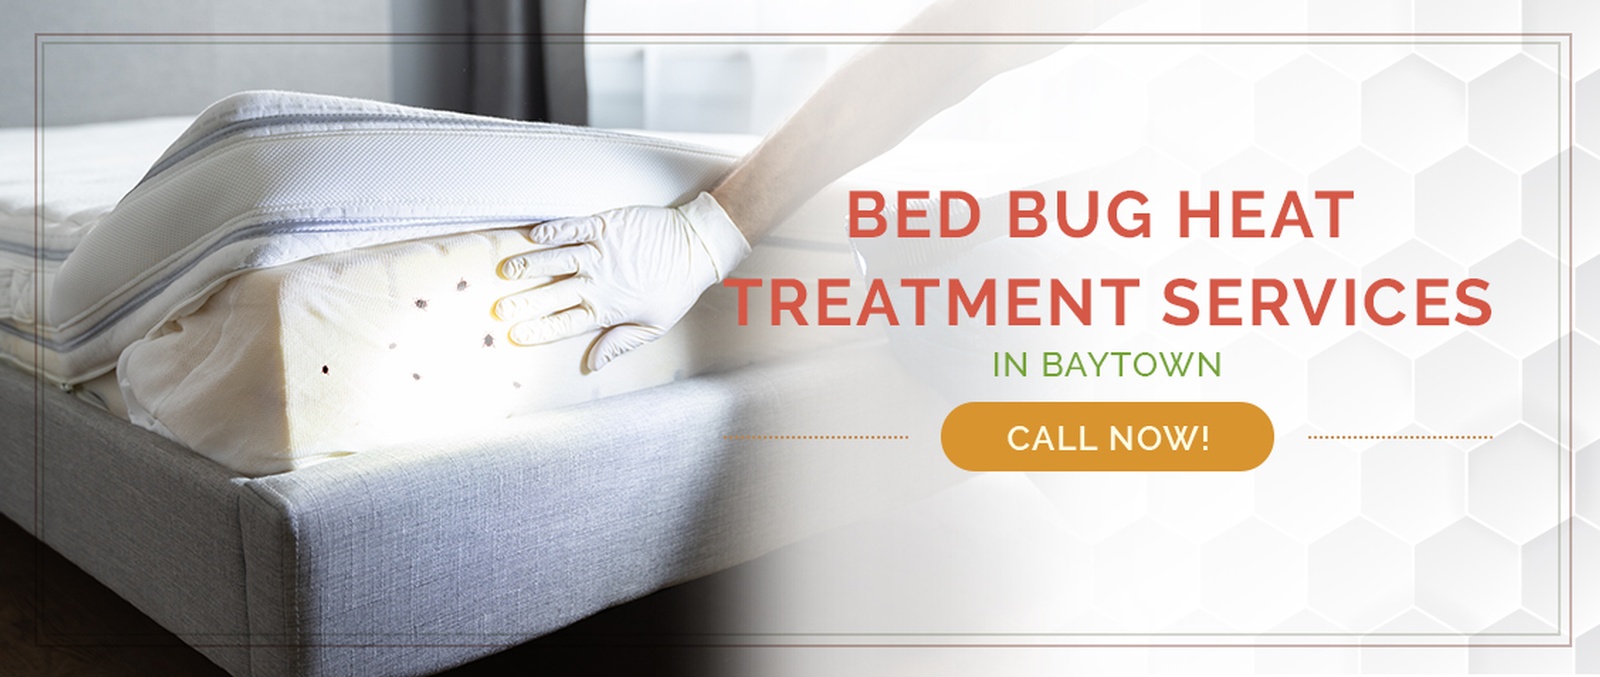 Baytown Bed Bug Treatment / Heater Rental Services by Houston Bed Bug Heaters